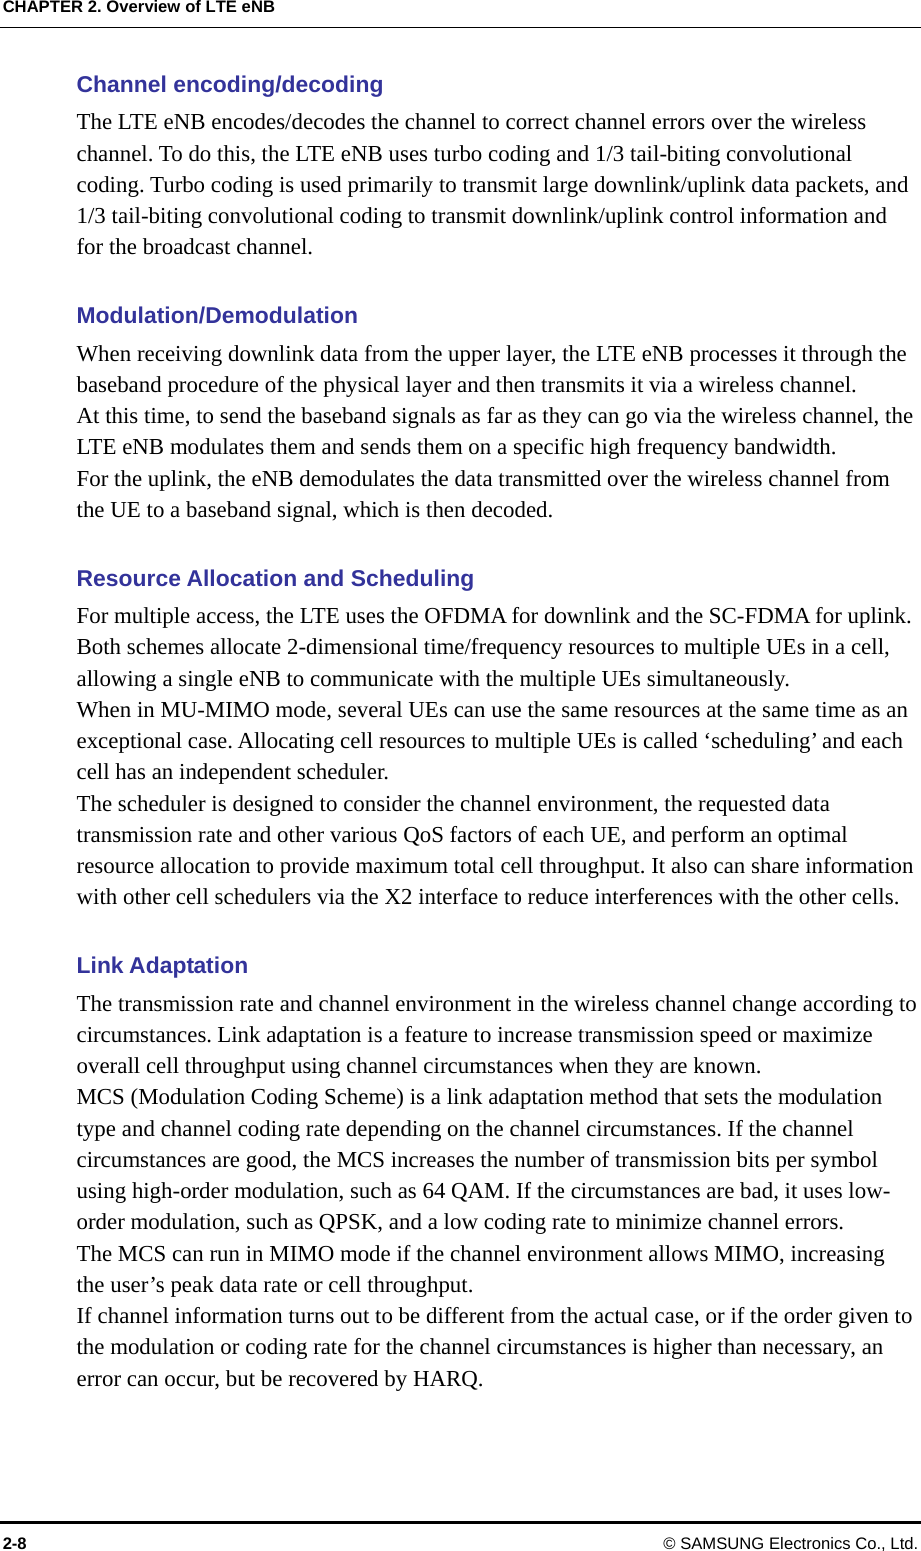 CHAPTER 2. Overview of LTE eNB Channel encoding/decoding The LTE eNB encodes/decodes the channel to correct channel errors over the wireless channel. To do this, the LTE eNB uses turbo coding and 1/3 tail-biting convolutional coding. Turbo coding is used primarily to transmit large downlink/uplink data packets, and 1/3 tail-biting convolutional coding to transmit downlink/uplink control information and for the broadcast channel.  Modulation/Demodulation  When receiving downlink data from the upper layer, the LTE eNB processes it through the baseband procedure of the physical layer and then transmits it via a wireless channel.   At this time, to send the baseband signals as far as they can go via the wireless channel, the LTE eNB modulates them and sends them on a specific high frequency bandwidth.   For the uplink, the eNB demodulates the data transmitted over the wireless channel from the UE to a baseband signal, which is then decoded.  Resource Allocation and Scheduling For multiple access, the LTE uses the OFDMA for downlink and the SC-FDMA for uplink. Both schemes allocate 2-dimensional time/frequency resources to multiple UEs in a cell, allowing a single eNB to communicate with the multiple UEs simultaneously.   When in MU-MIMO mode, several UEs can use the same resources at the same time as an exceptional case. Allocating cell resources to multiple UEs is called ‘scheduling’ and each cell has an independent scheduler. The scheduler is designed to consider the channel environment, the requested data transmission rate and other various QoS factors of each UE, and perform an optimal resource allocation to provide maximum total cell throughput. It also can share information with other cell schedulers via the X2 interface to reduce interferences with the other cells.  Link Adaptation The transmission rate and channel environment in the wireless channel change according to circumstances. Link adaptation is a feature to increase transmission speed or maximize overall cell throughput using channel circumstances when they are known.   MCS (Modulation Coding Scheme) is a link adaptation method that sets the modulation type and channel coding rate depending on the channel circumstances. If the channel circumstances are good, the MCS increases the number of transmission bits per symbol using high-order modulation, such as 64 QAM. If the circumstances are bad, it uses low-order modulation, such as QPSK, and a low coding rate to minimize channel errors.     The MCS can run in MIMO mode if the channel environment allows MIMO, increasing the user’s peak data rate or cell throughput. If channel information turns out to be different from the actual case, or if the order given to the modulation or coding rate for the channel circumstances is higher than necessary, an error can occur, but be recovered by HARQ.  2-8 © SAMSUNG Electronics Co., Ltd. 